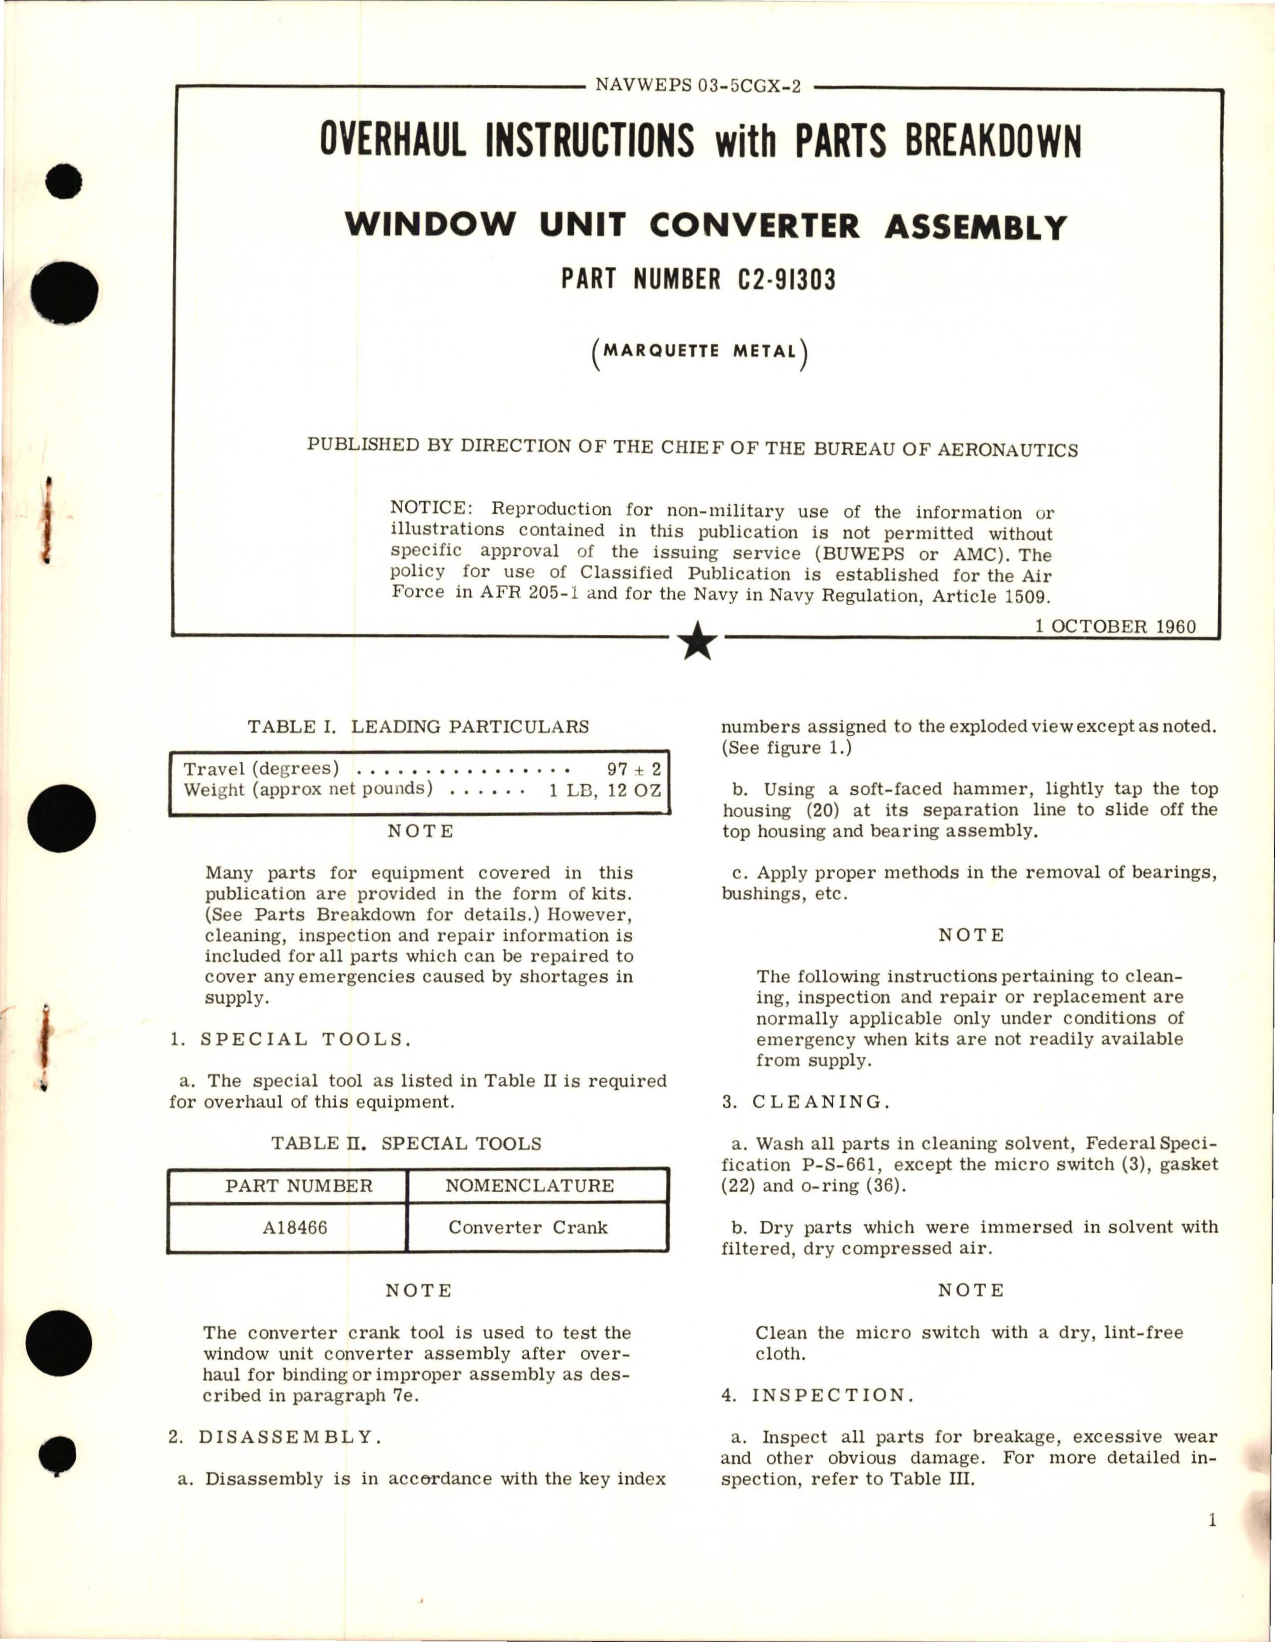 Sample page 1 from AirCorps Library document: Overhaul Instructions with Parts Breakdown for Window Unit Converter Assembly - Part C2-91303